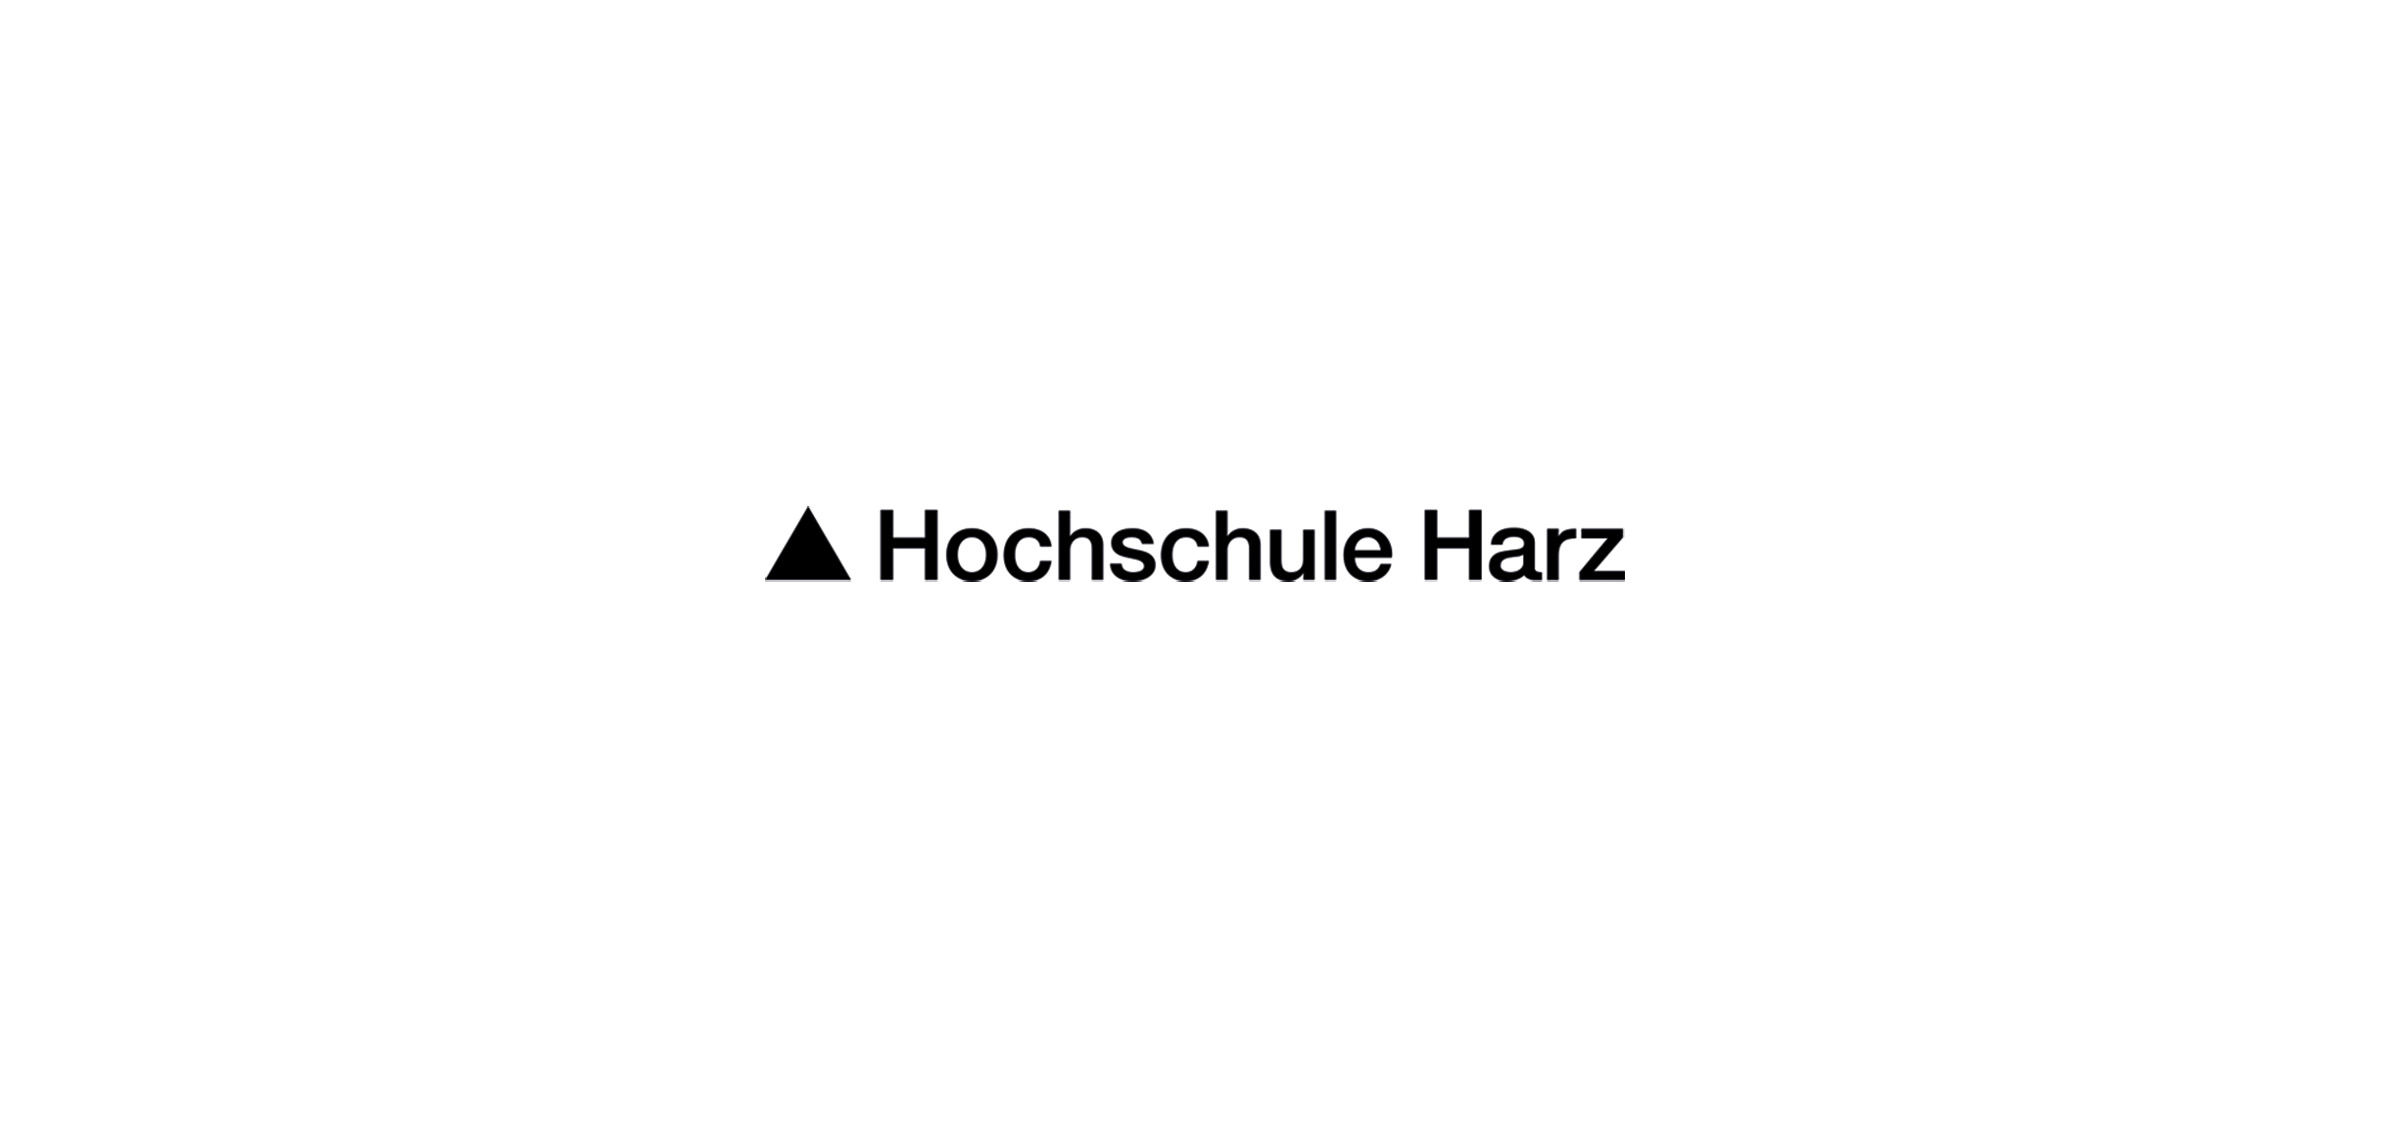 The new logo of Hochschule Harz on white background. It consists of a black triangle and a sans serif wordmark.